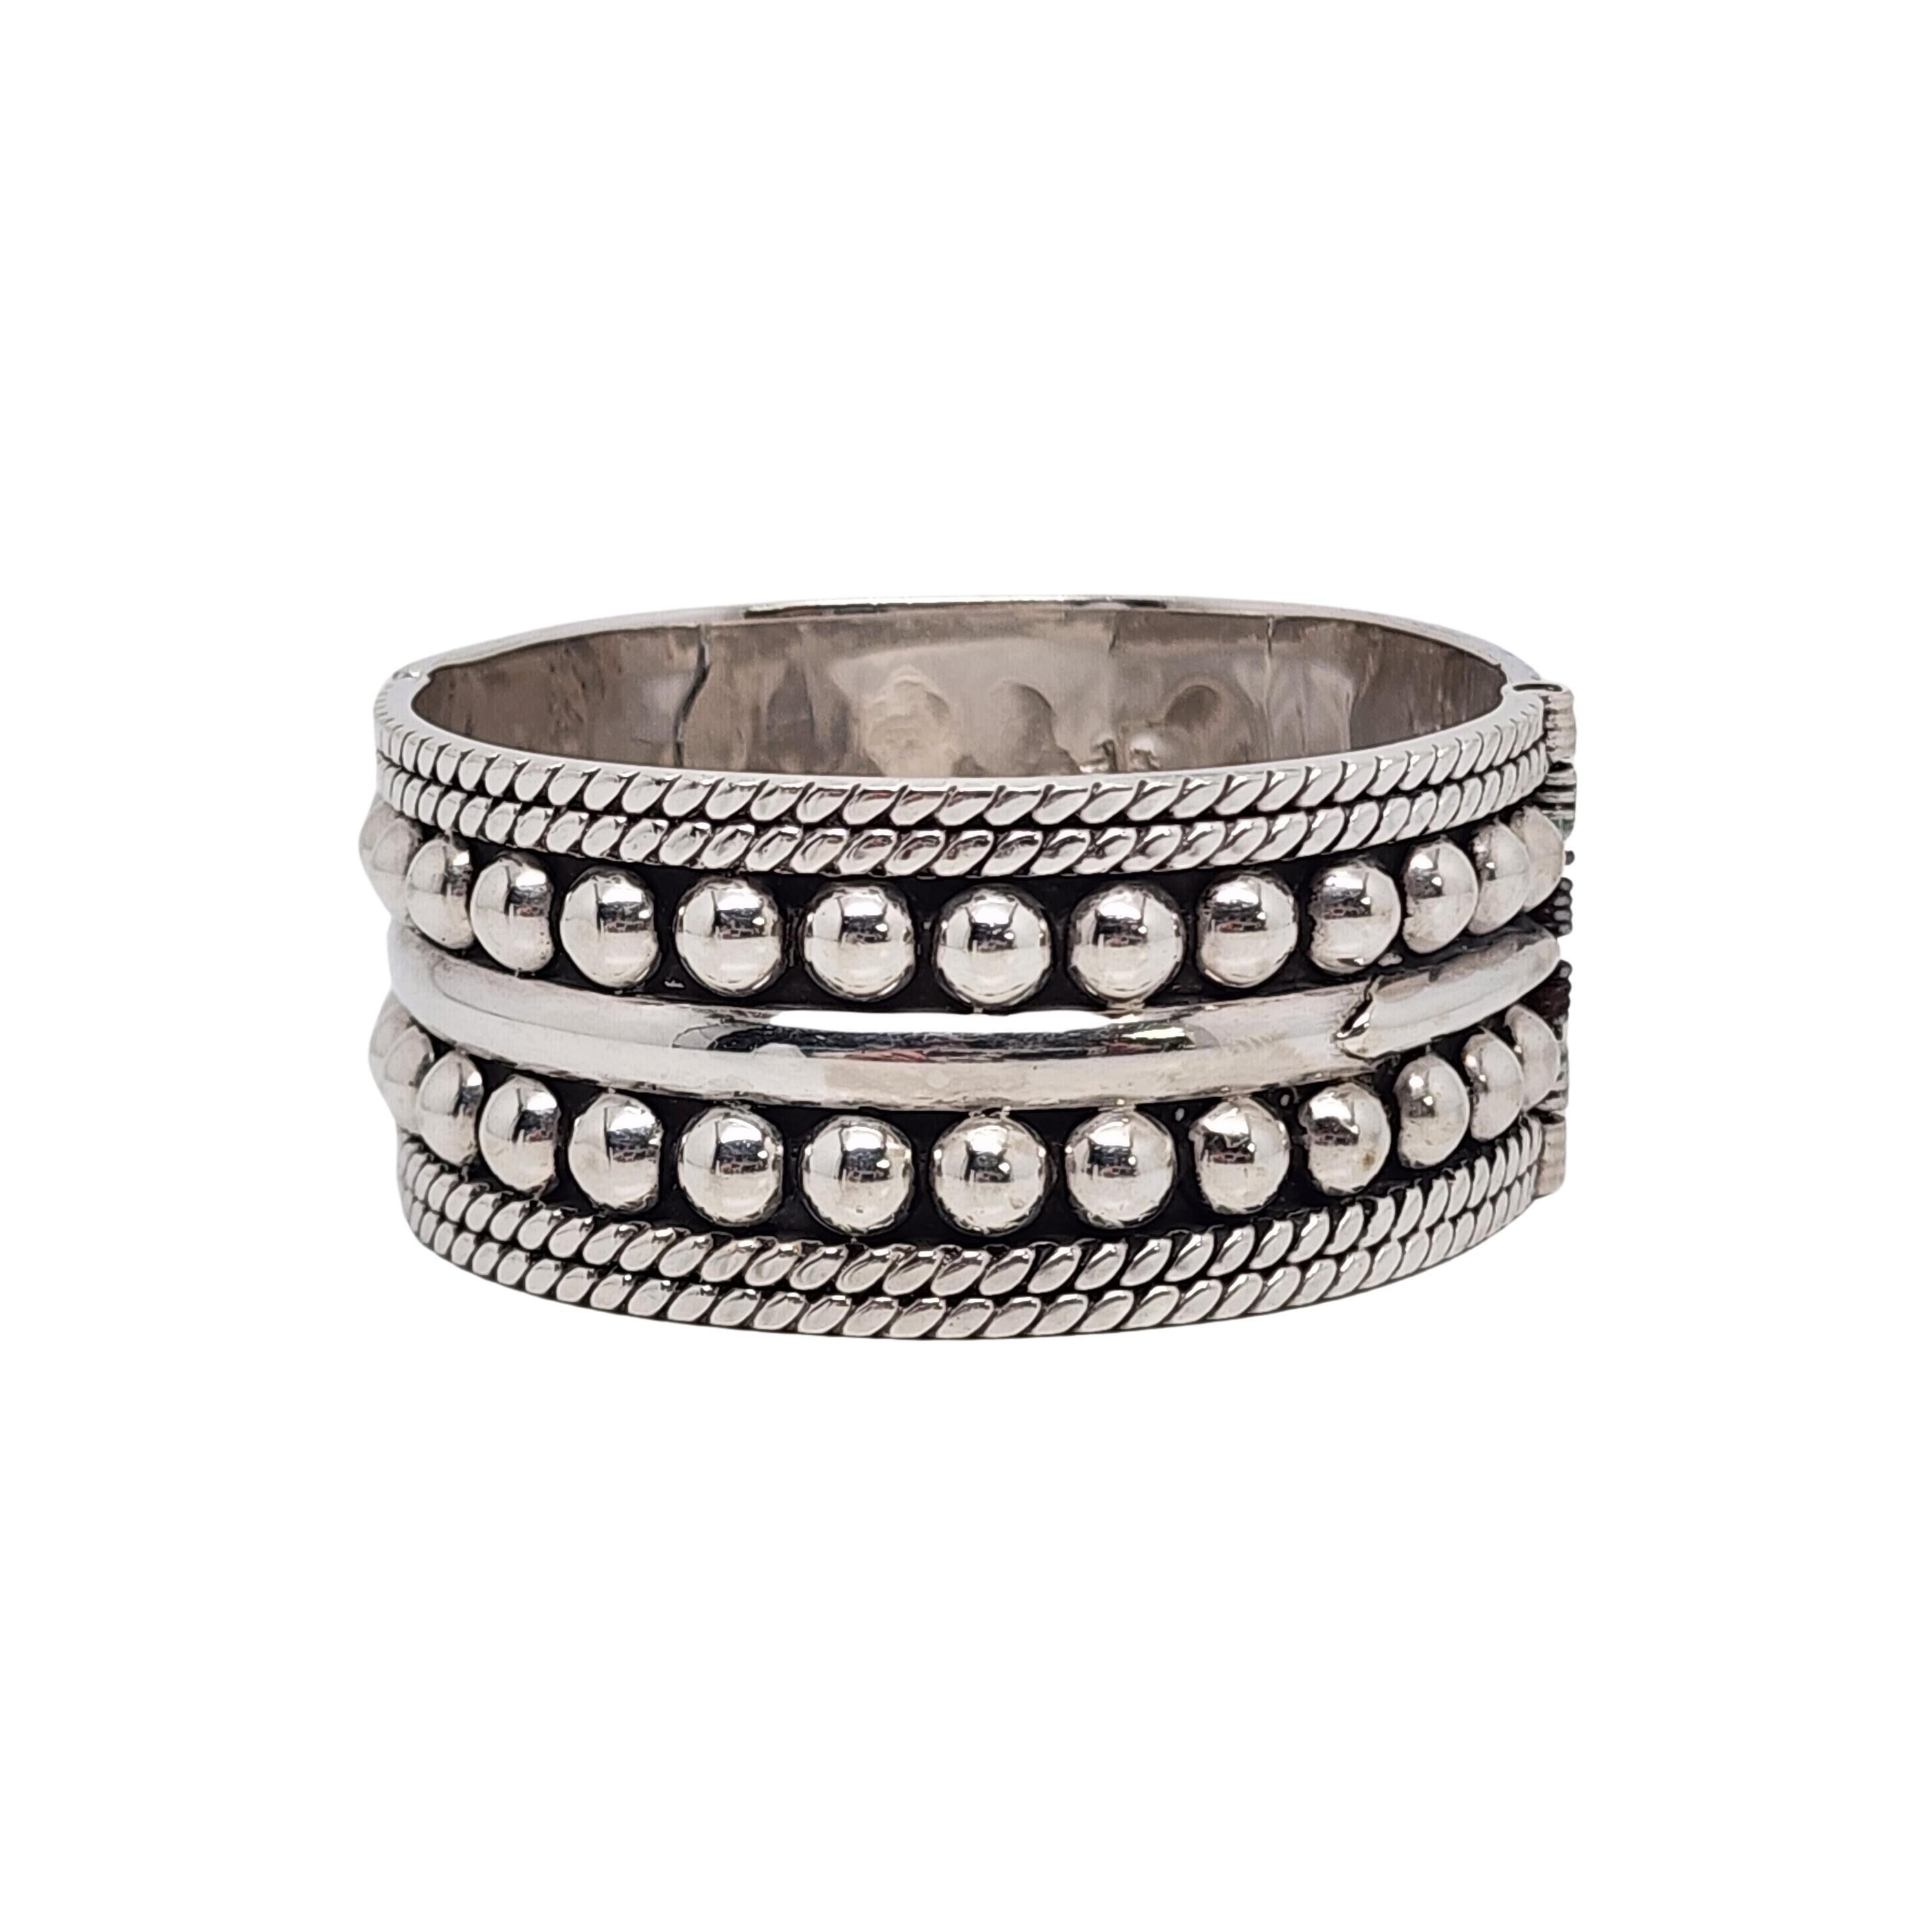 Sterling silver wide hinged bangle bracelet by Taxco, Mexico artisan.

A large and significant bracelet featuring a double row of bead design and textured rope edging.

Weighs approx 68.4g, 44.0dwt

Measures approx 7 